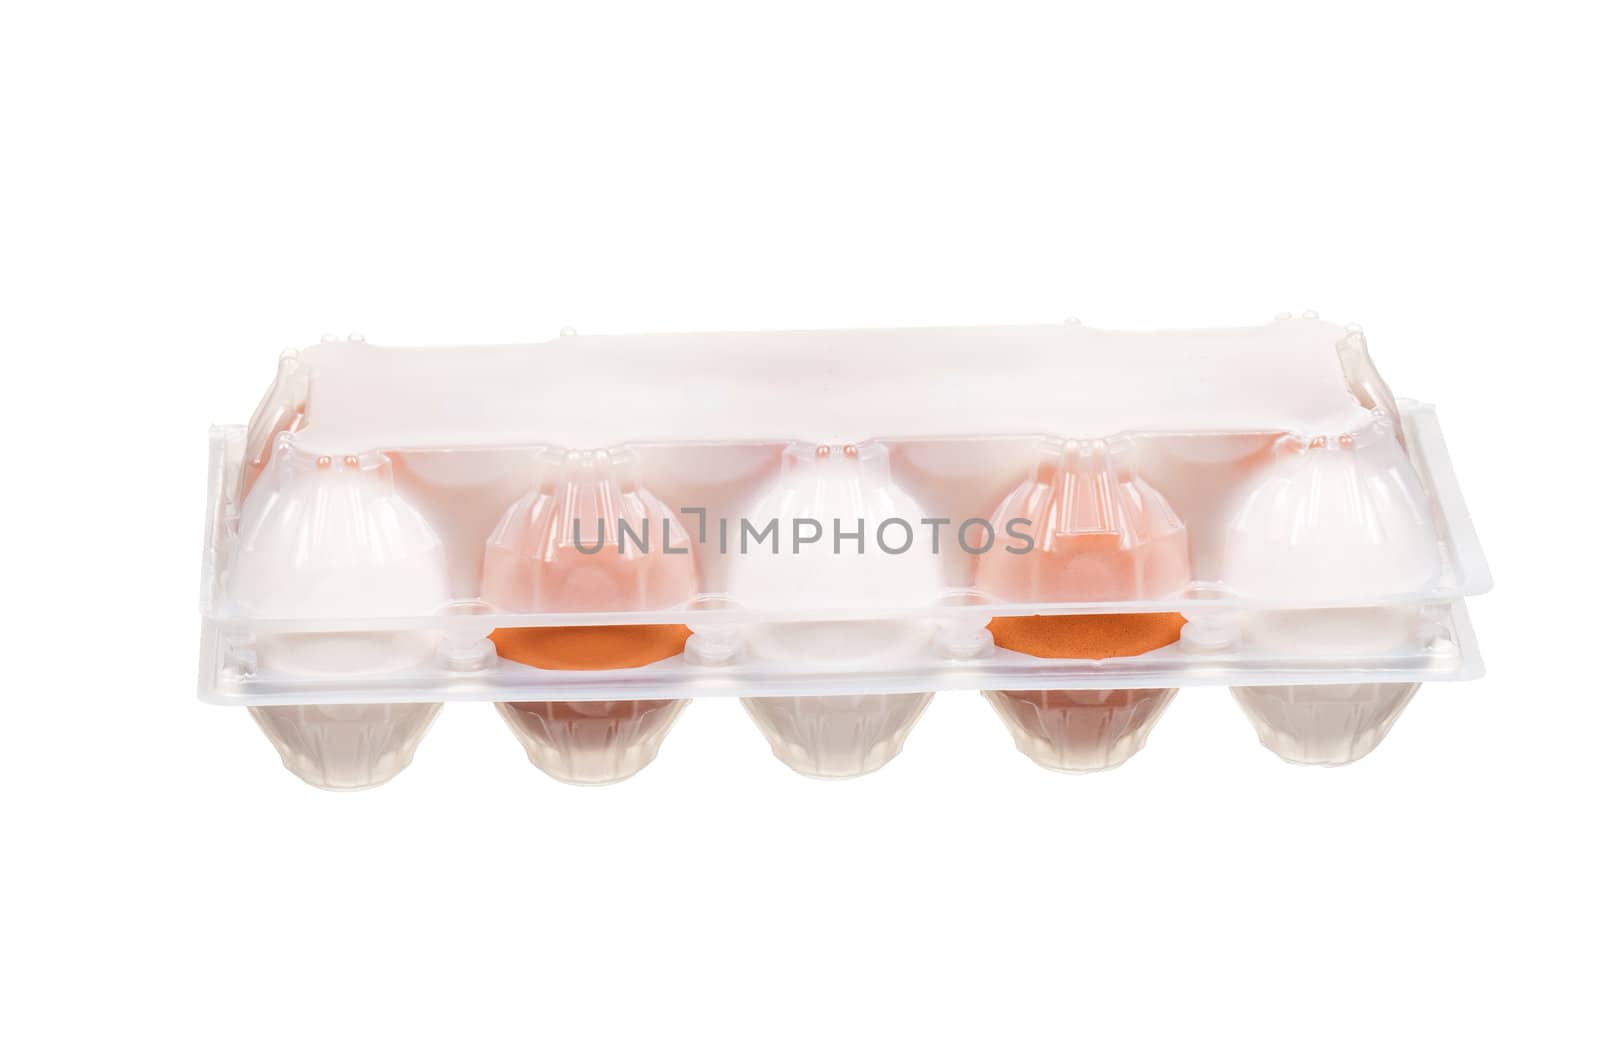 Brown and white eggs in the plastic box over white background